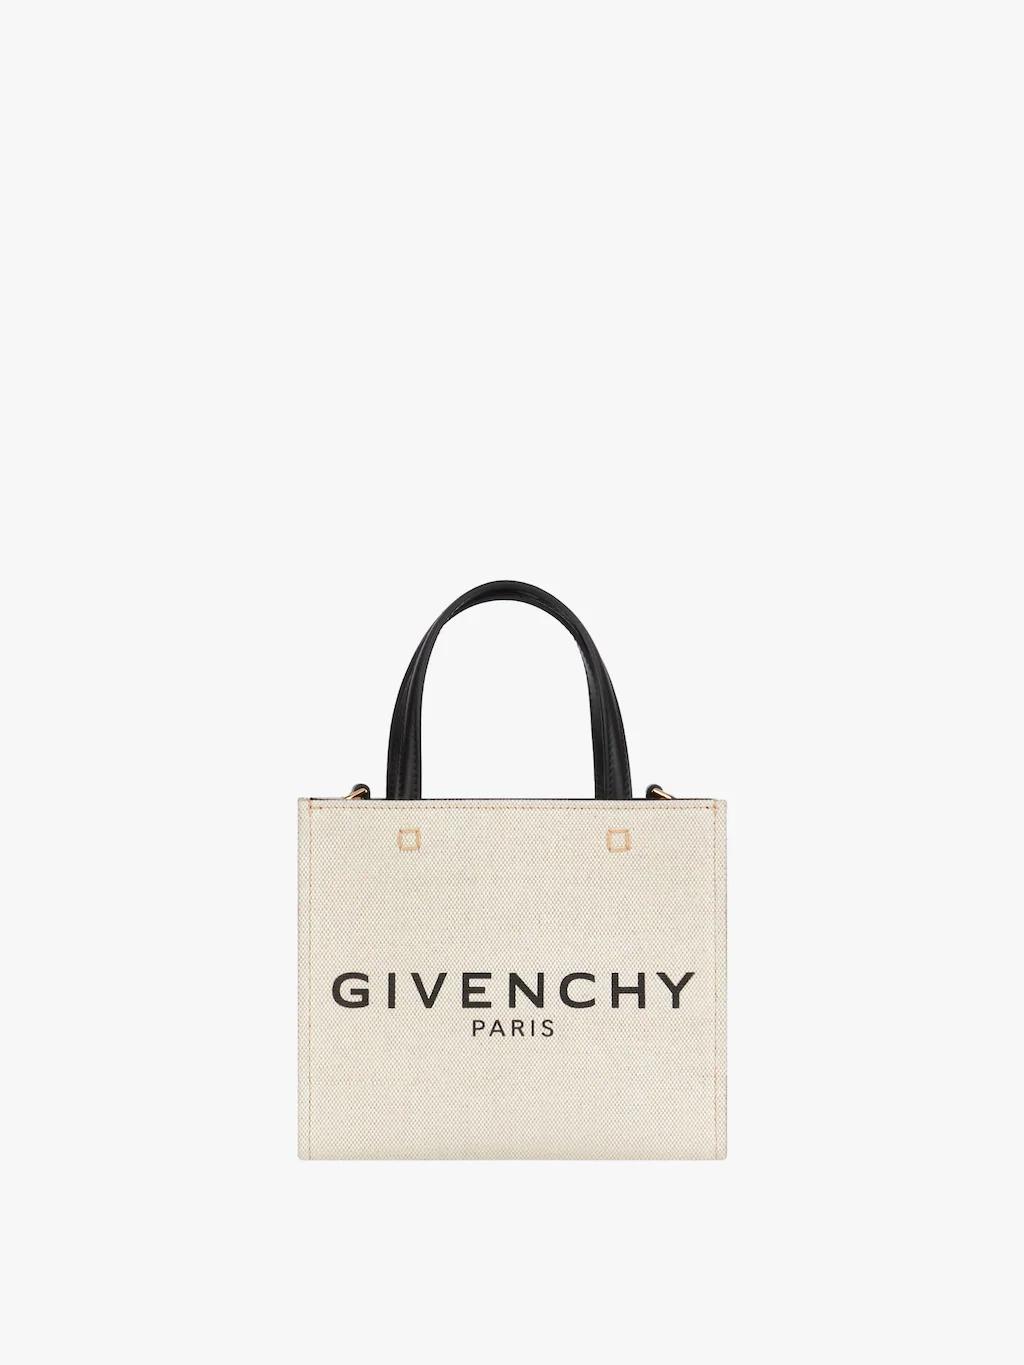 mini-g-tote-shopping-bag-in-canvas-4814_16844003921-1000